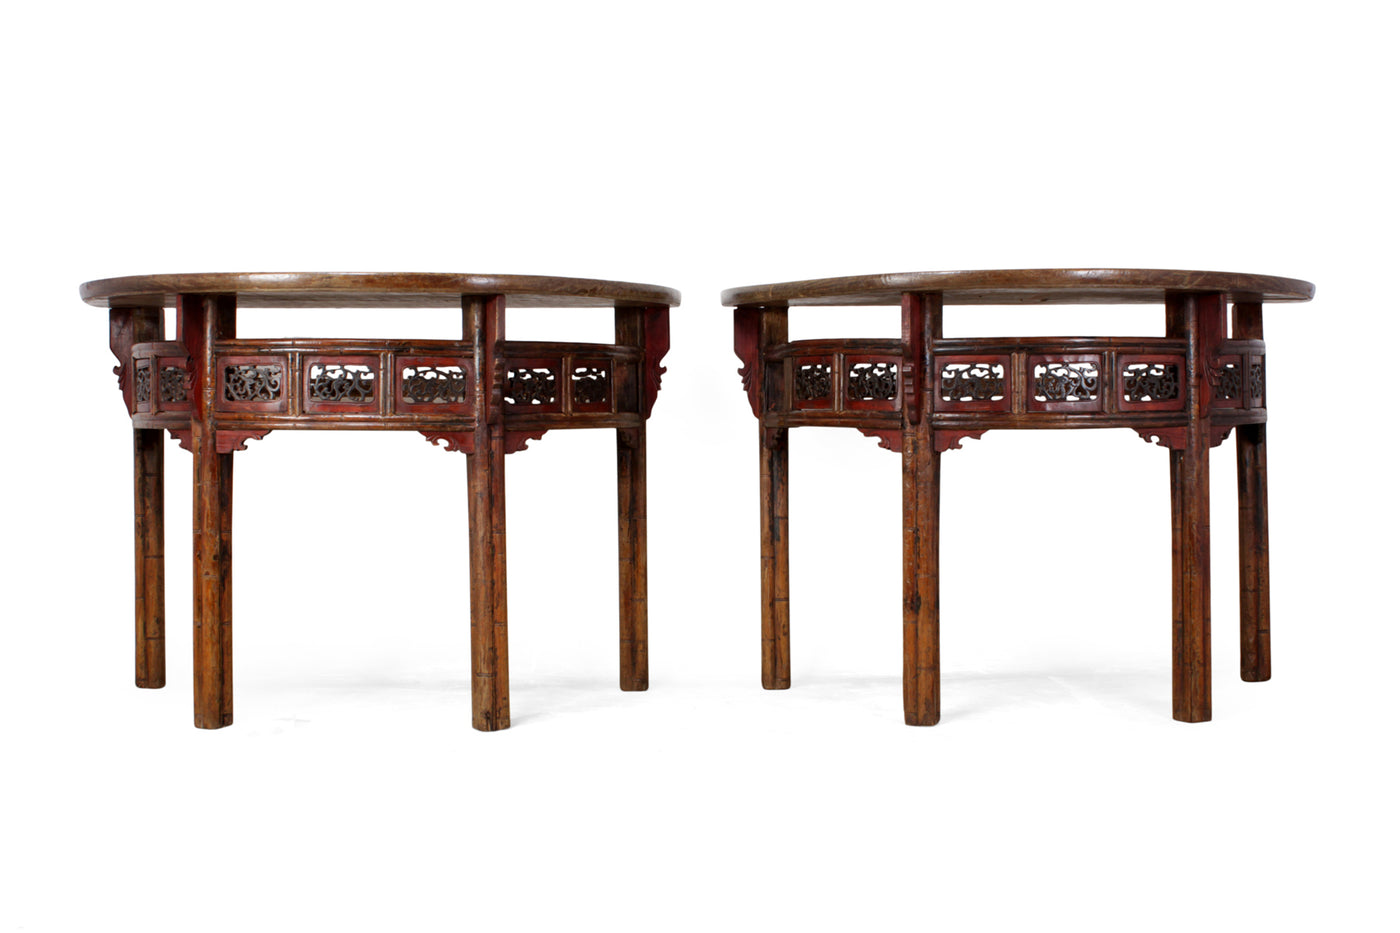 Pair of Chinese Half Moon Console Tables c1860